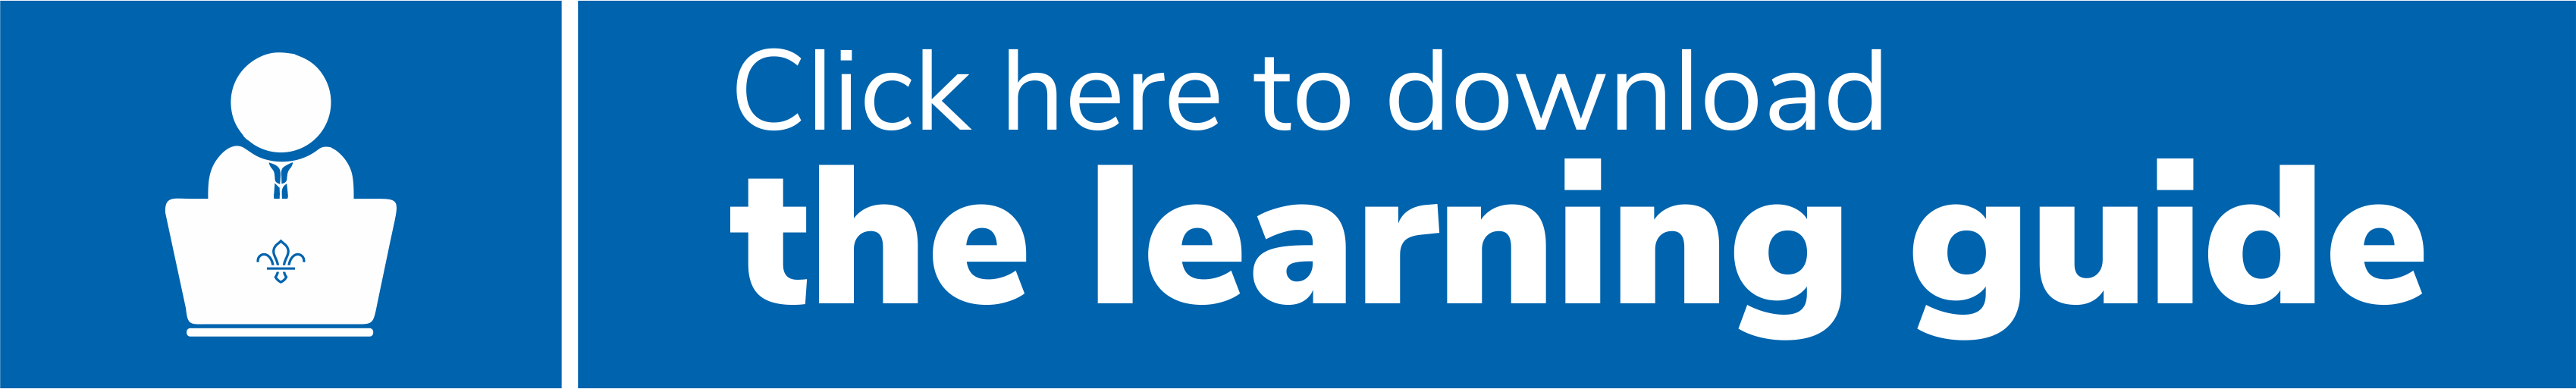 Click here to download the learning guide 